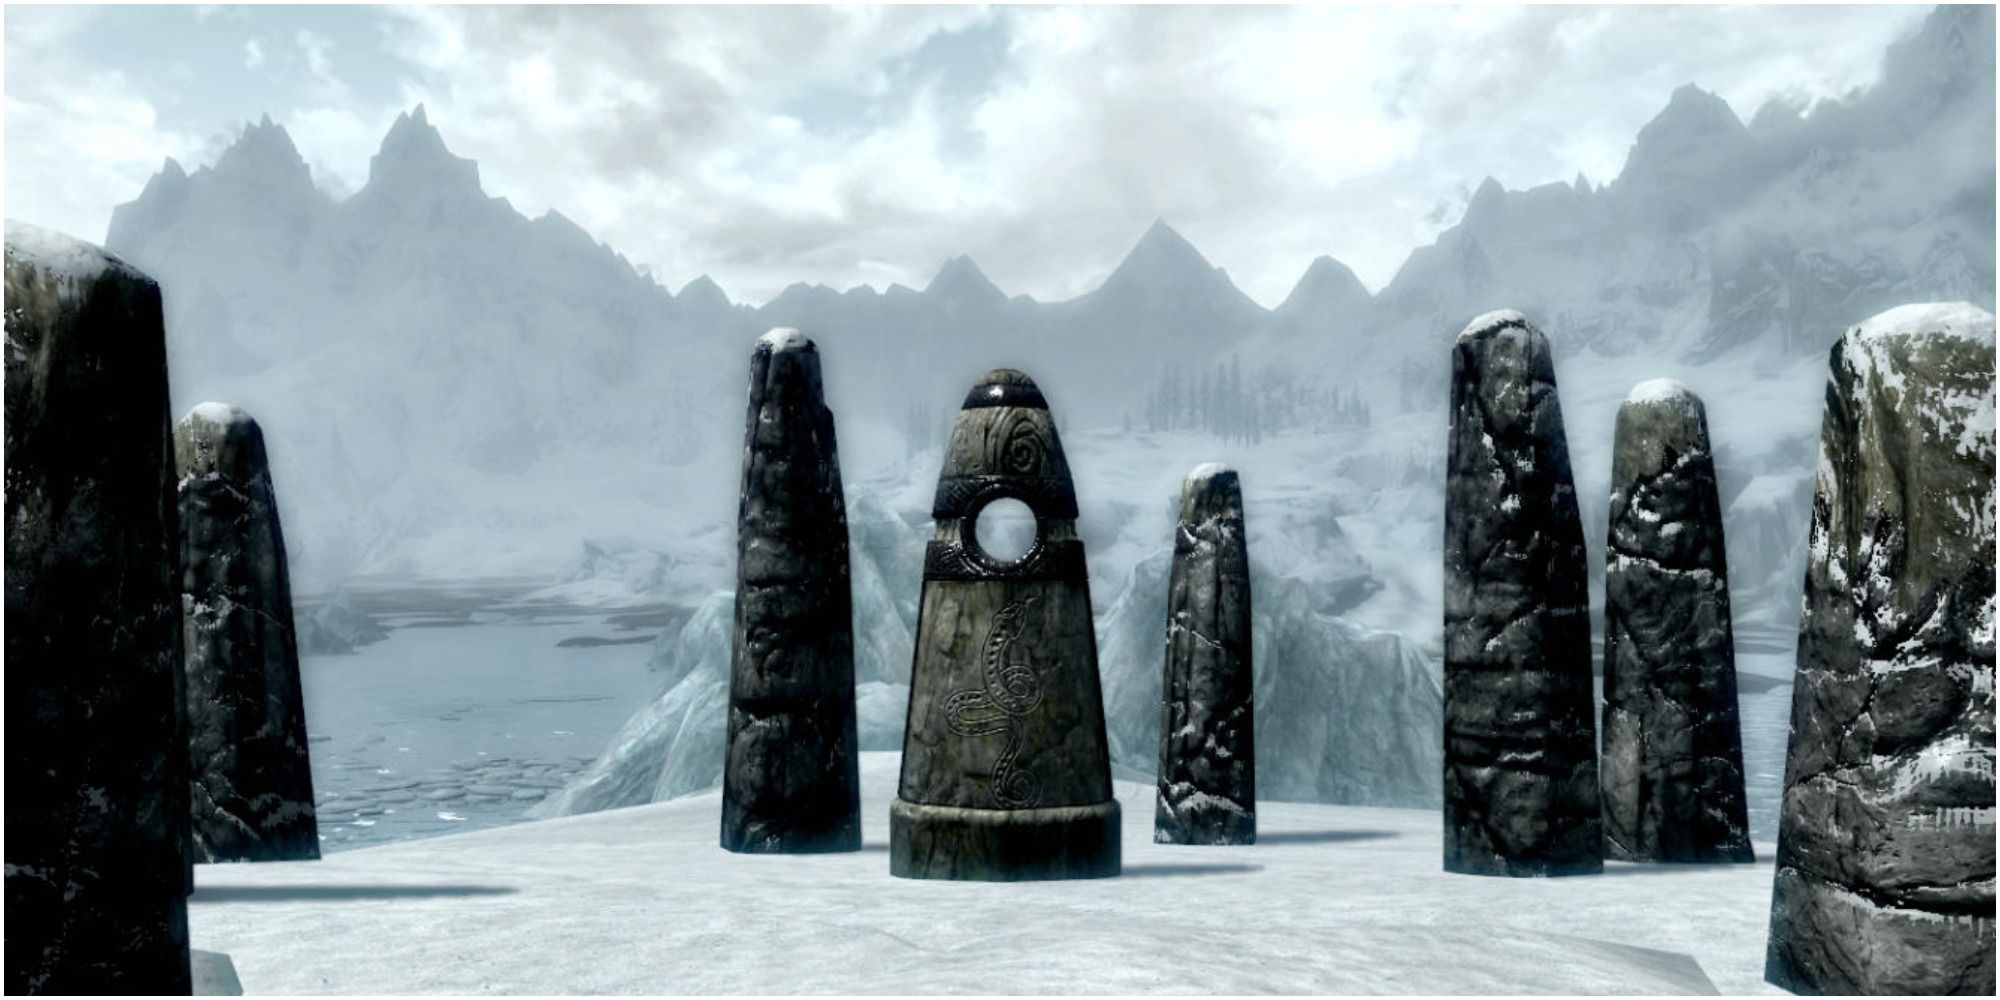 The Serpent Standing Stone in Skyrim